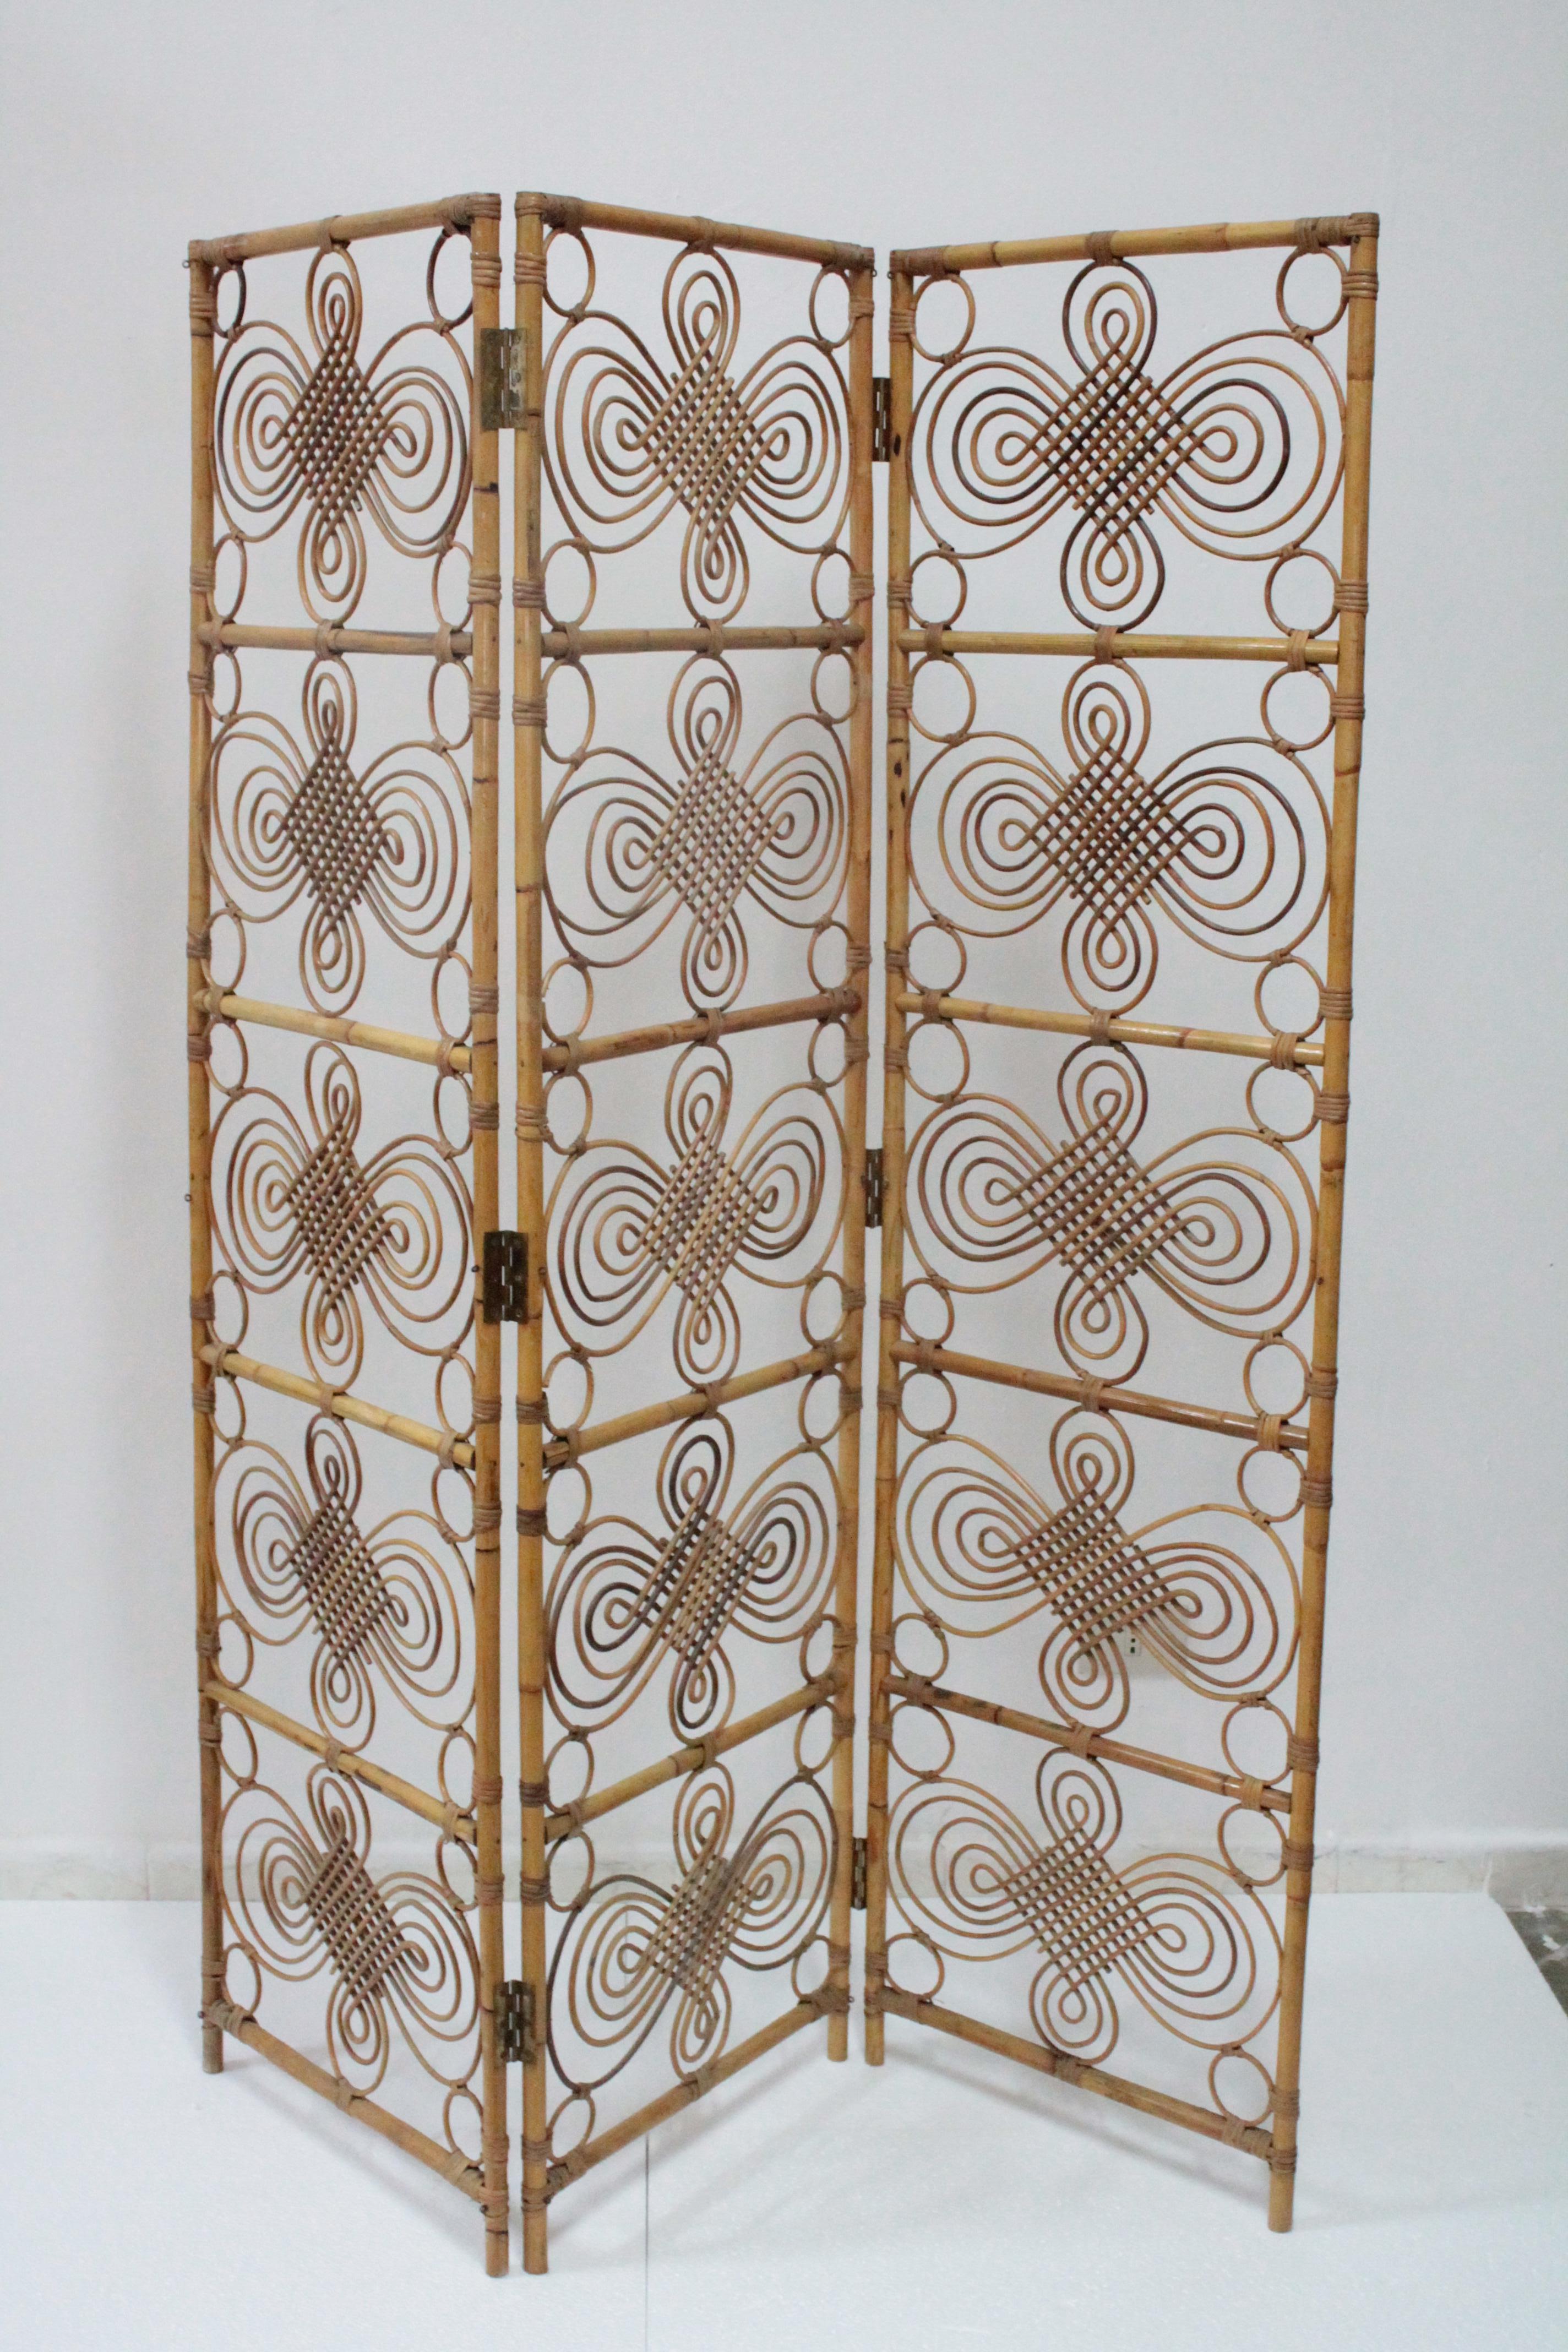 Decorative Italian Vintage Bamboo/Wicker Room Divider, 1970s For Sale 7